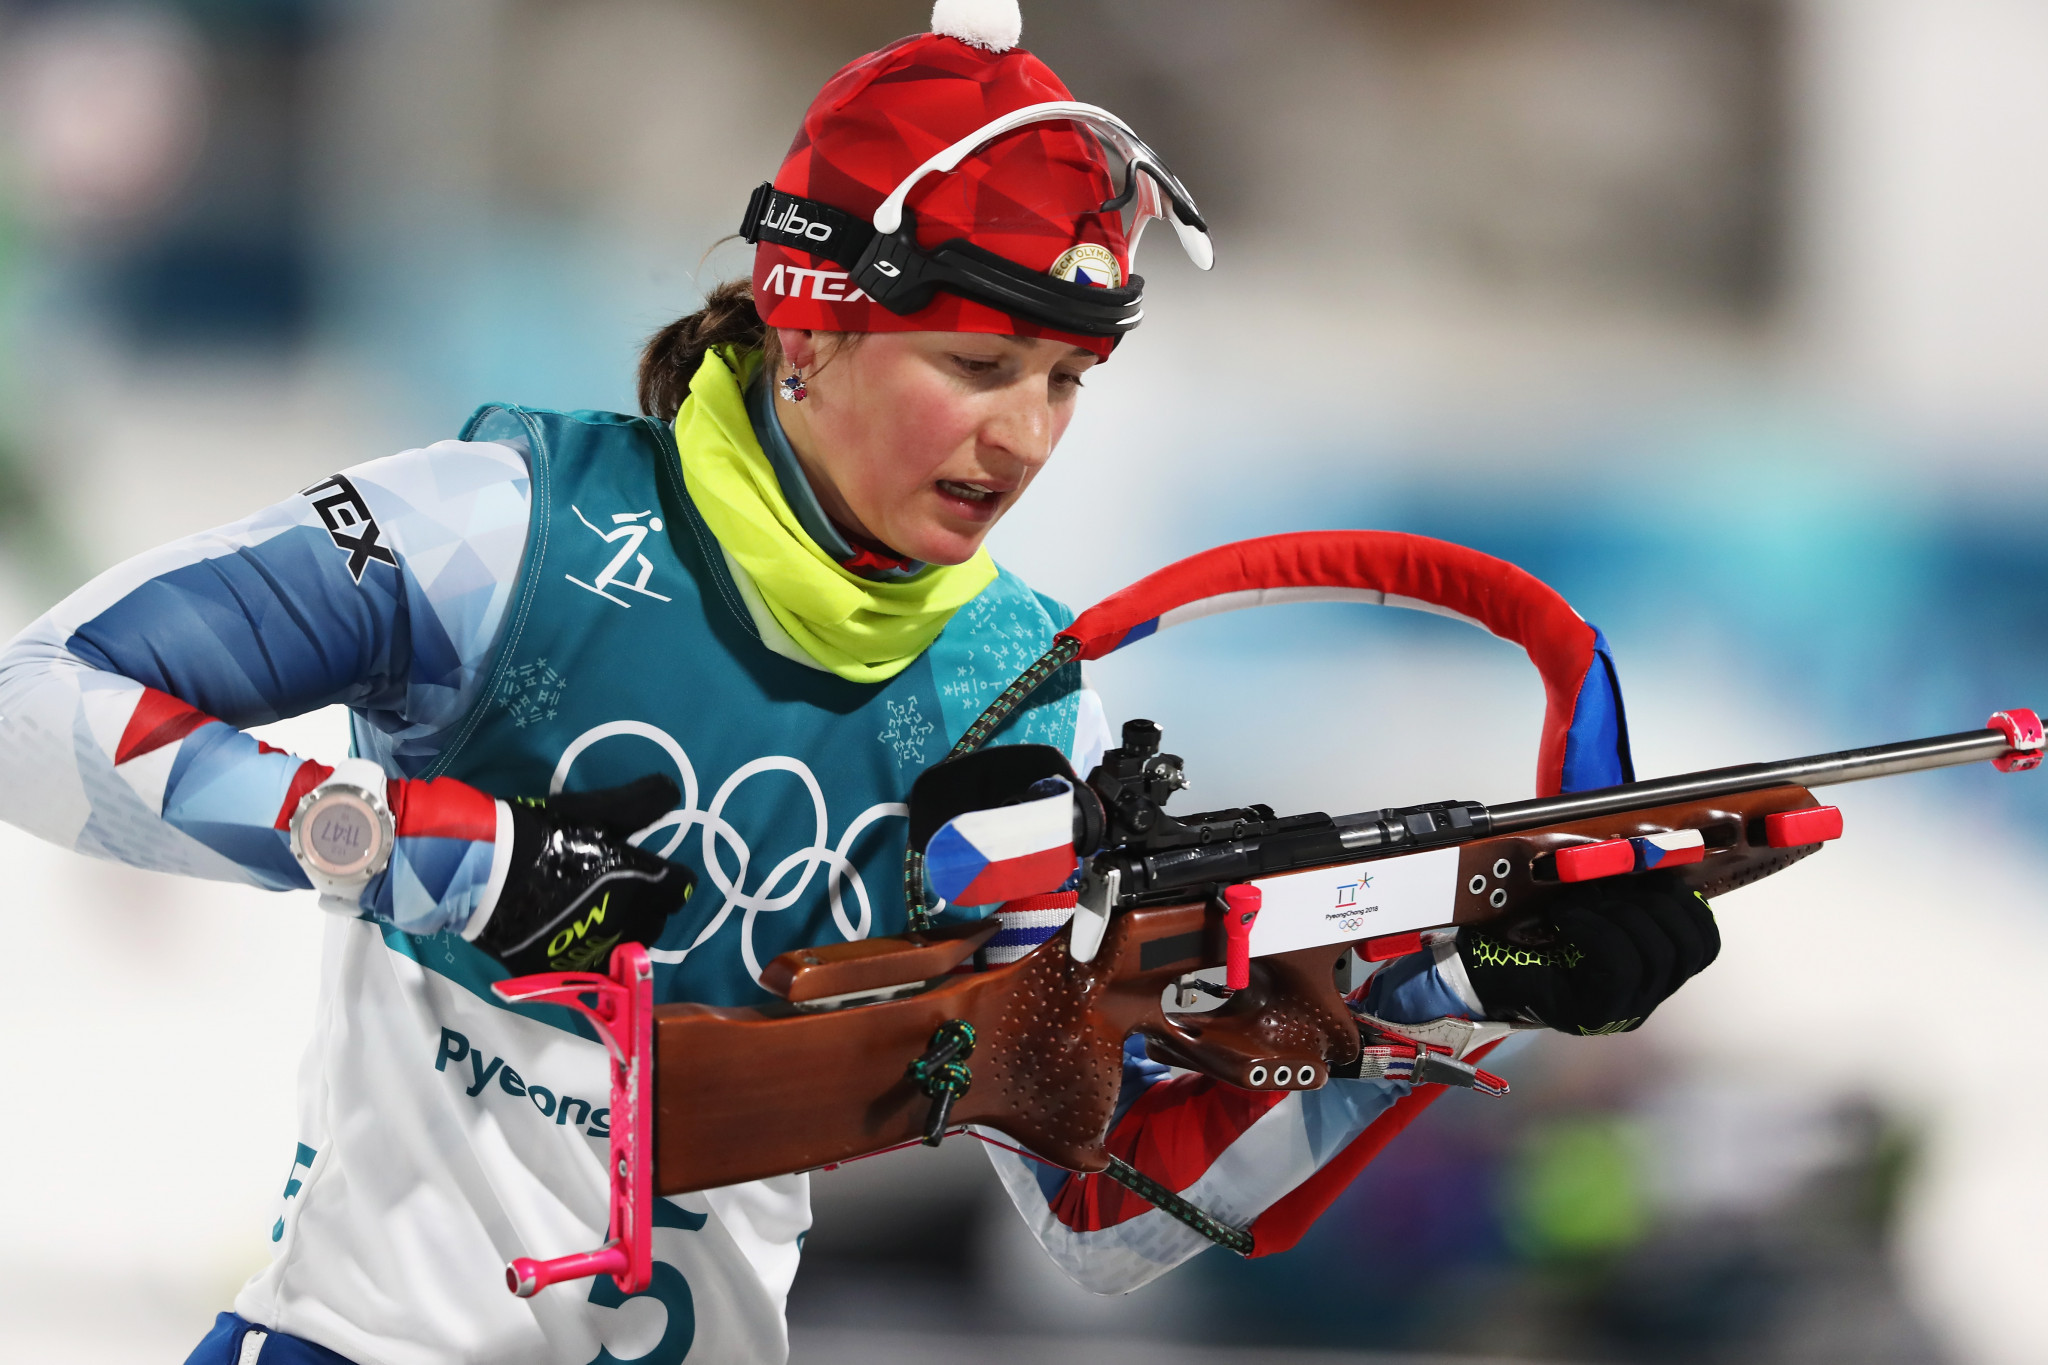 Veronika Vitkova, a Pyeongchang 2018 Winter Olympics silver medallist, will represent the host nation ©Getty Images